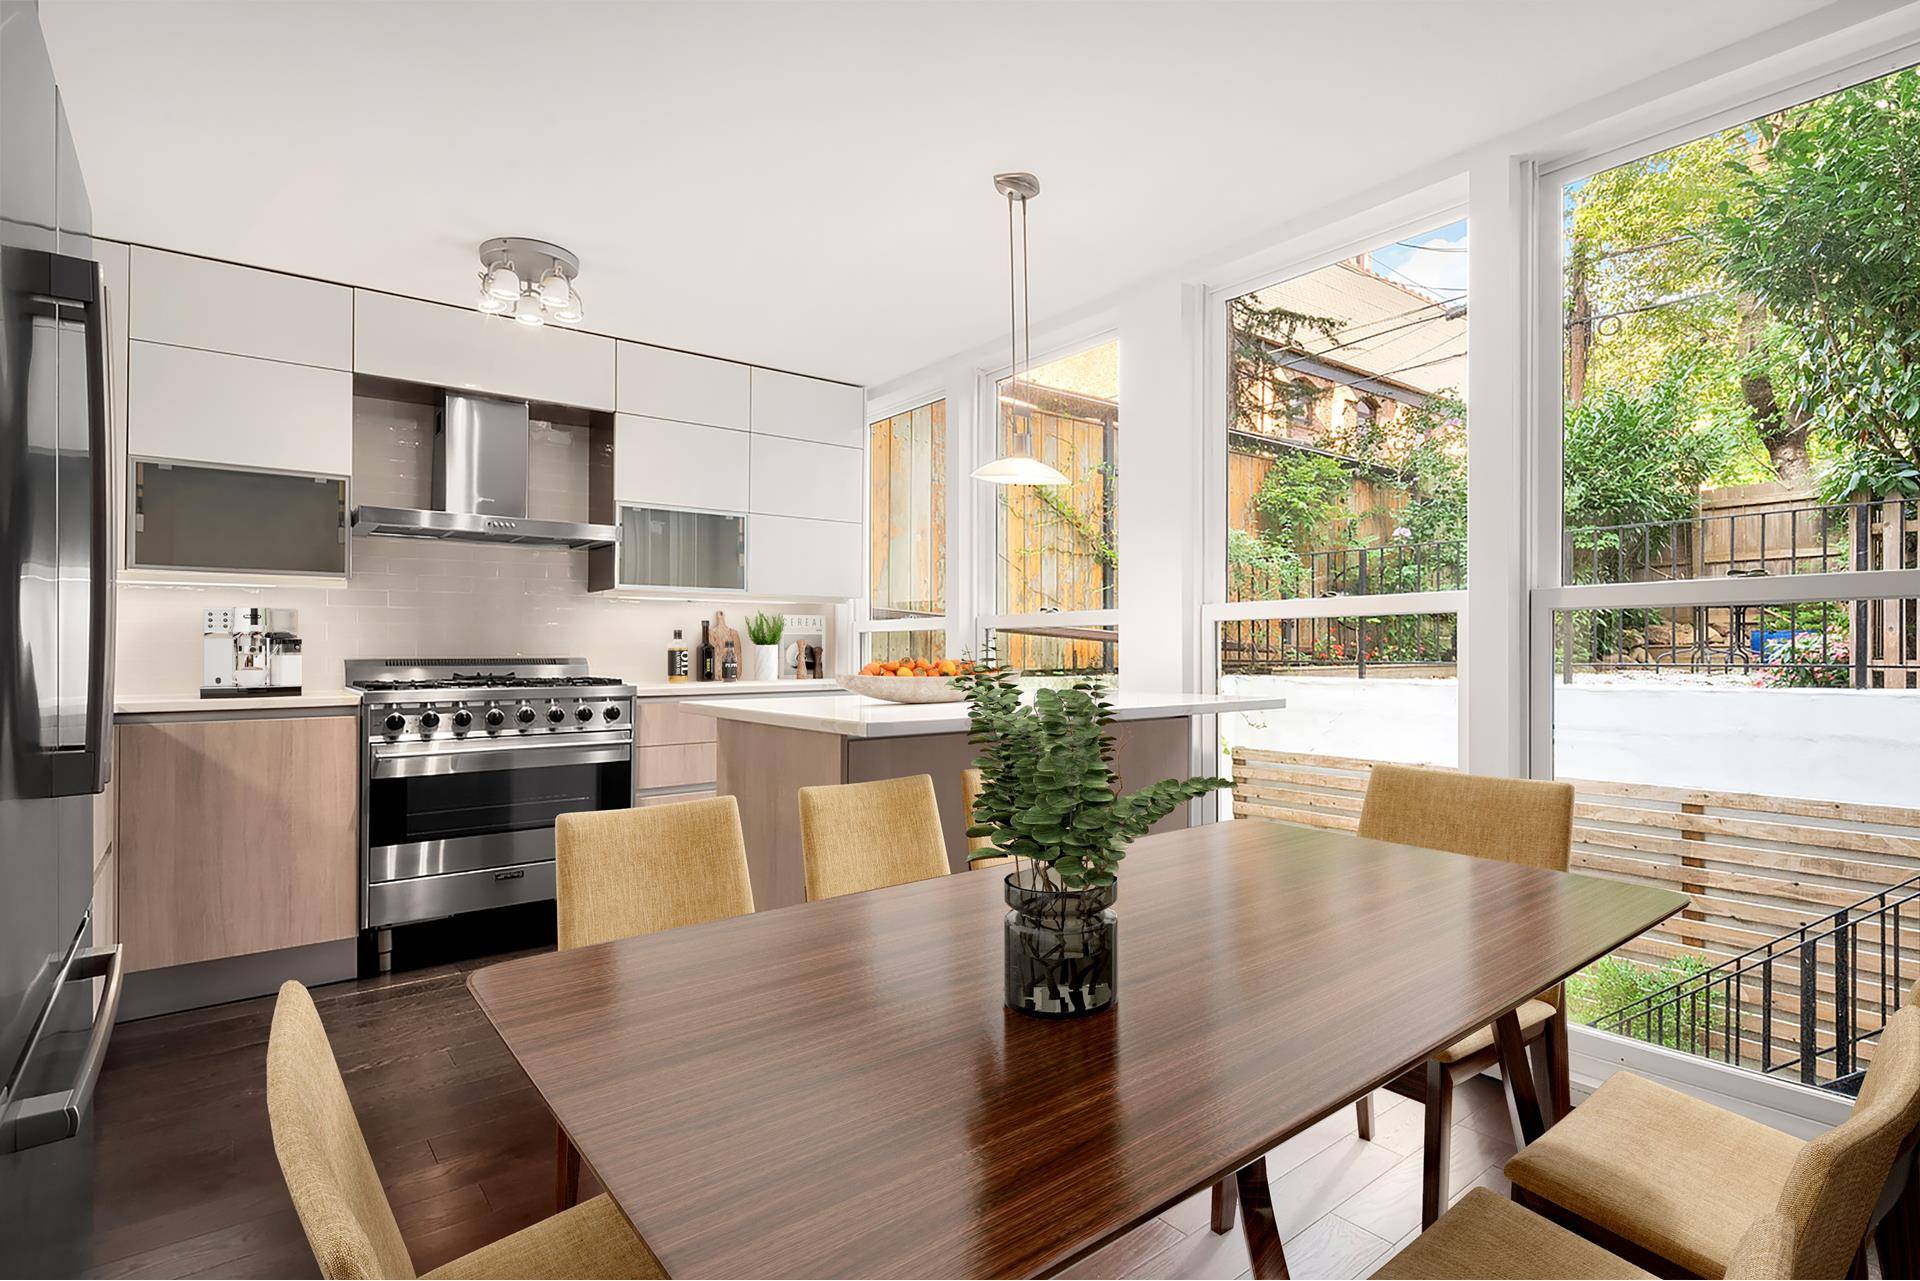 Please noteTaxes are 0J51 Abatement commenced in 2018Welcome to 239 Carlton Avenue, an exquisite 25' Greek Revival townhouse nestled on one of Brooklyn's most coveted blocks.